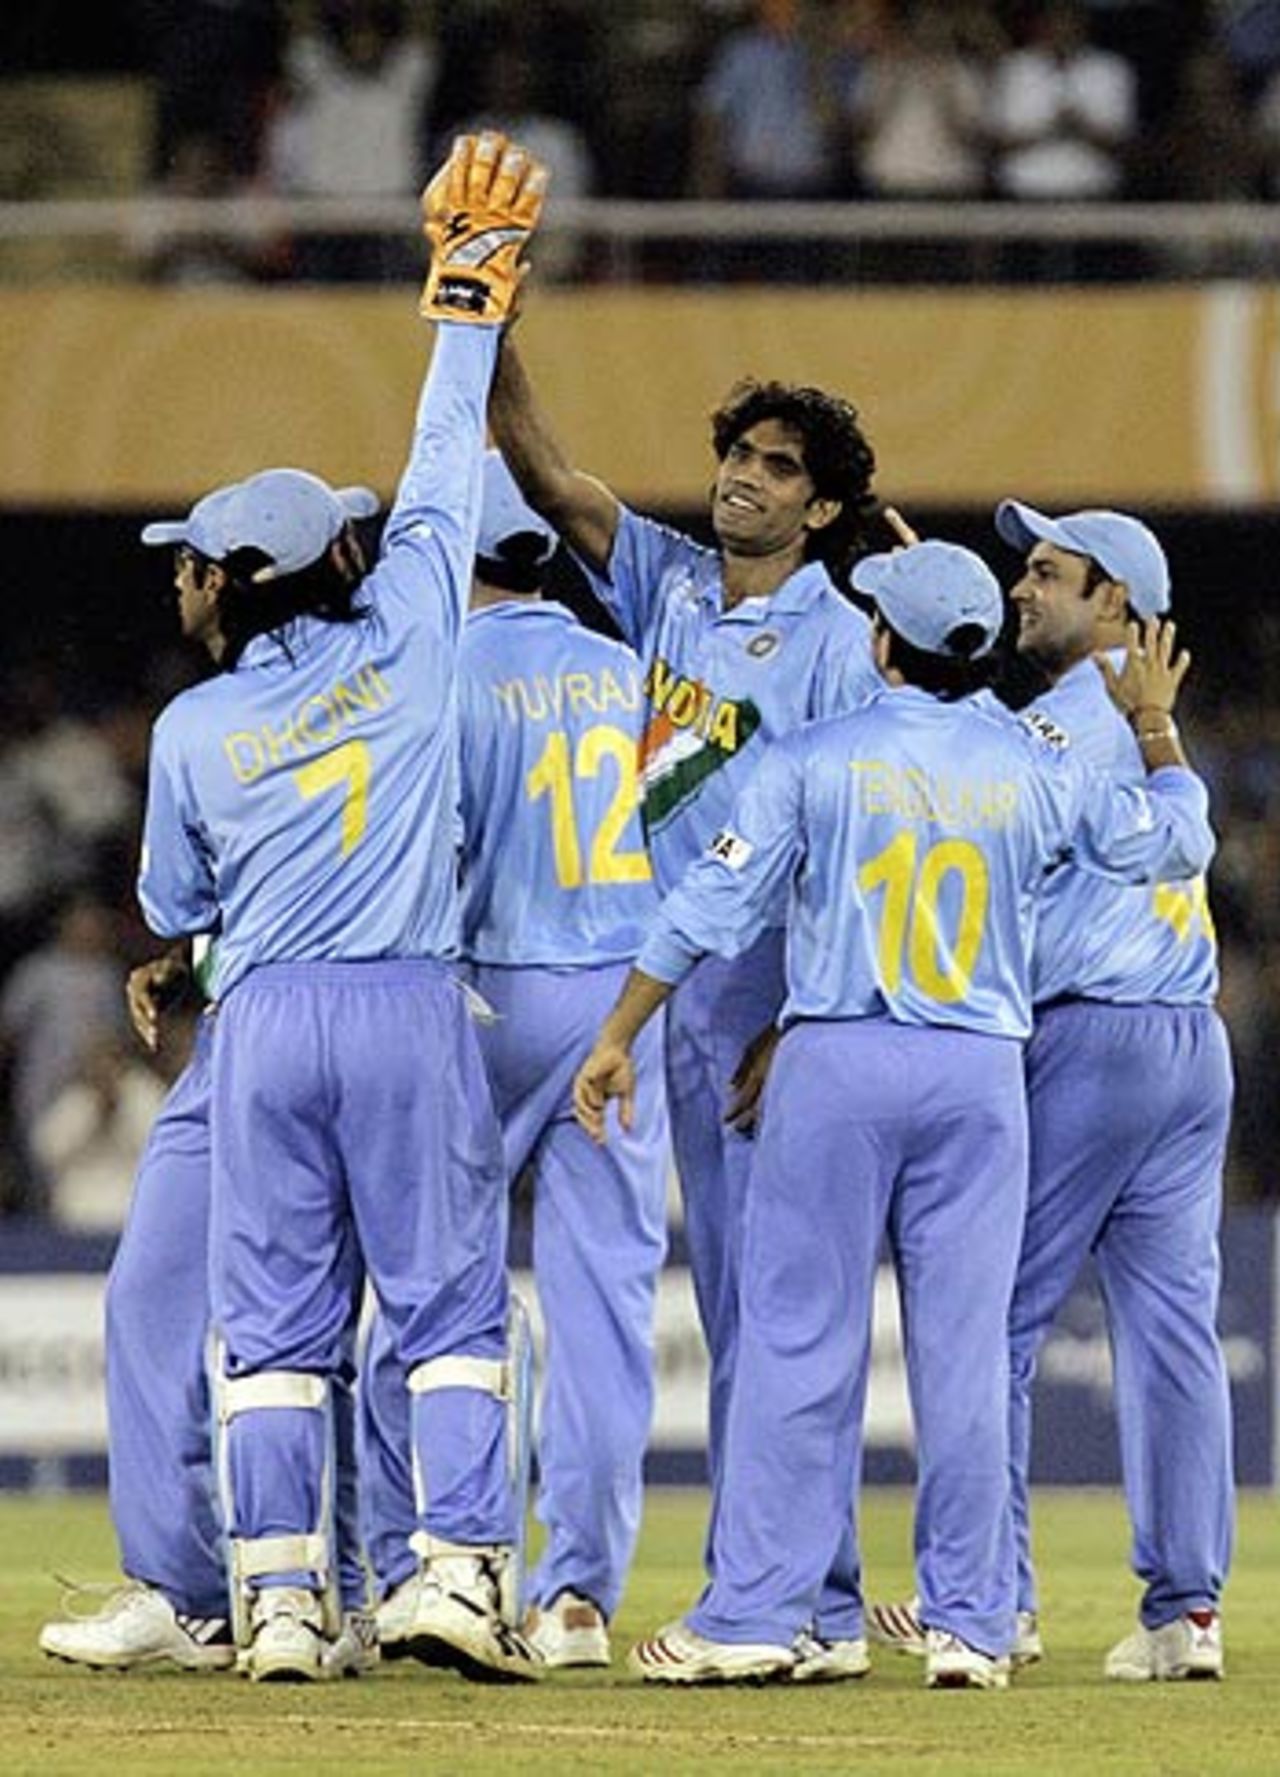 Munaf Patel and his team-mates celebrate after Chris Gayle falls to a skier, India v West Indies, 9th match, Champions Trophy, Ahmedabad, October 26, 2006